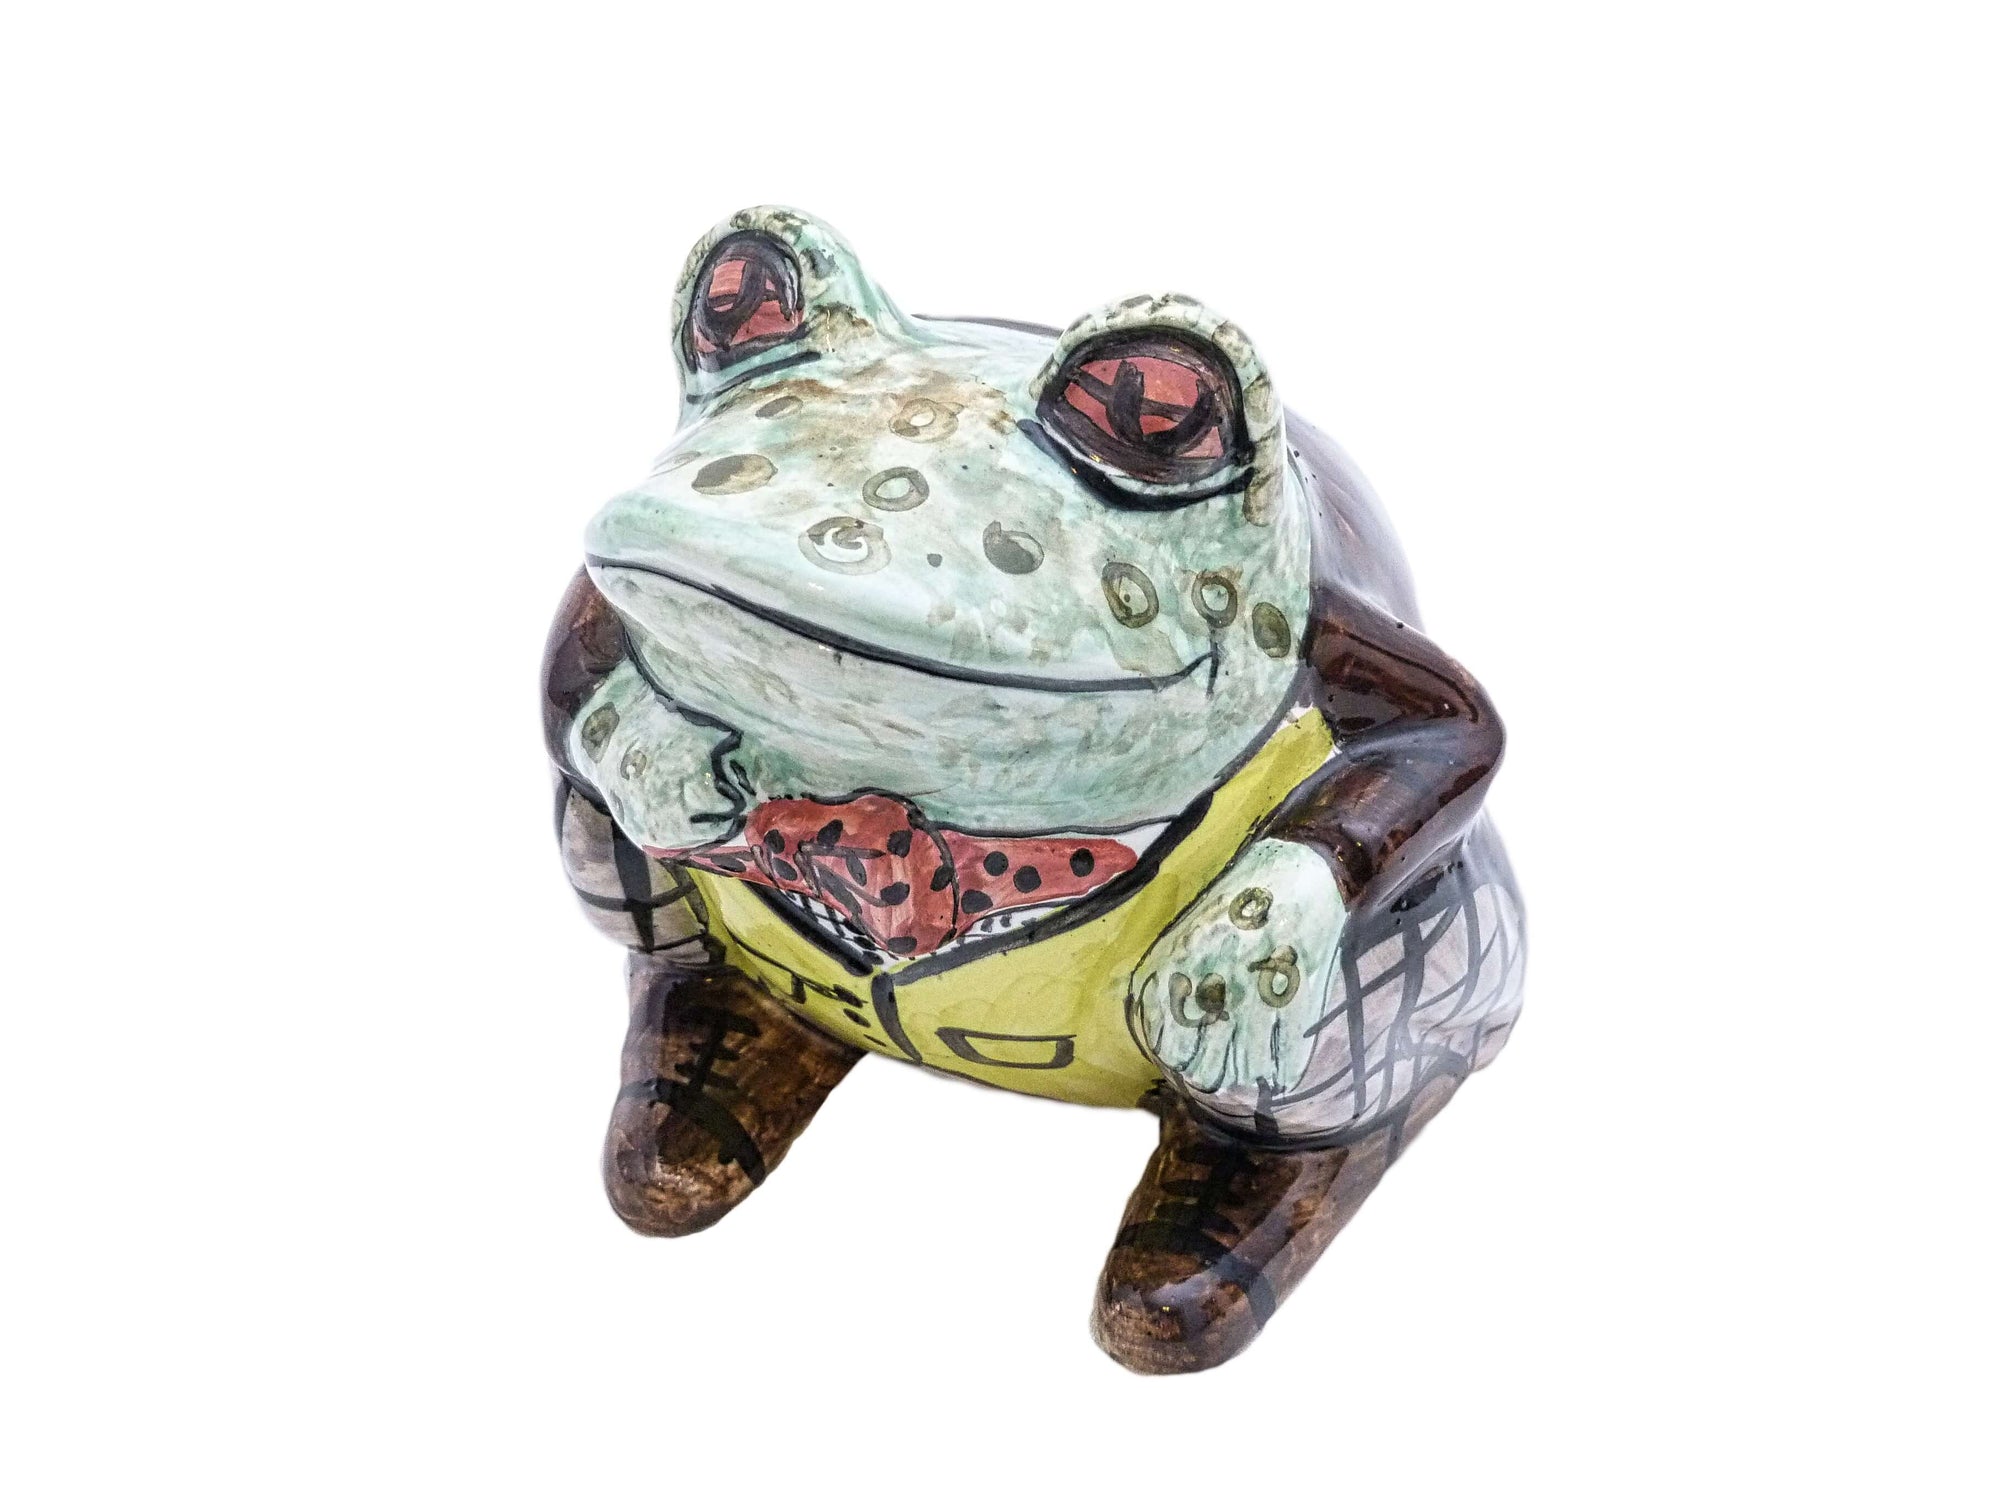 Mr Toad Figurine, Toady, The Wind In The Willows, David Sharp Figurine, Hand Painted